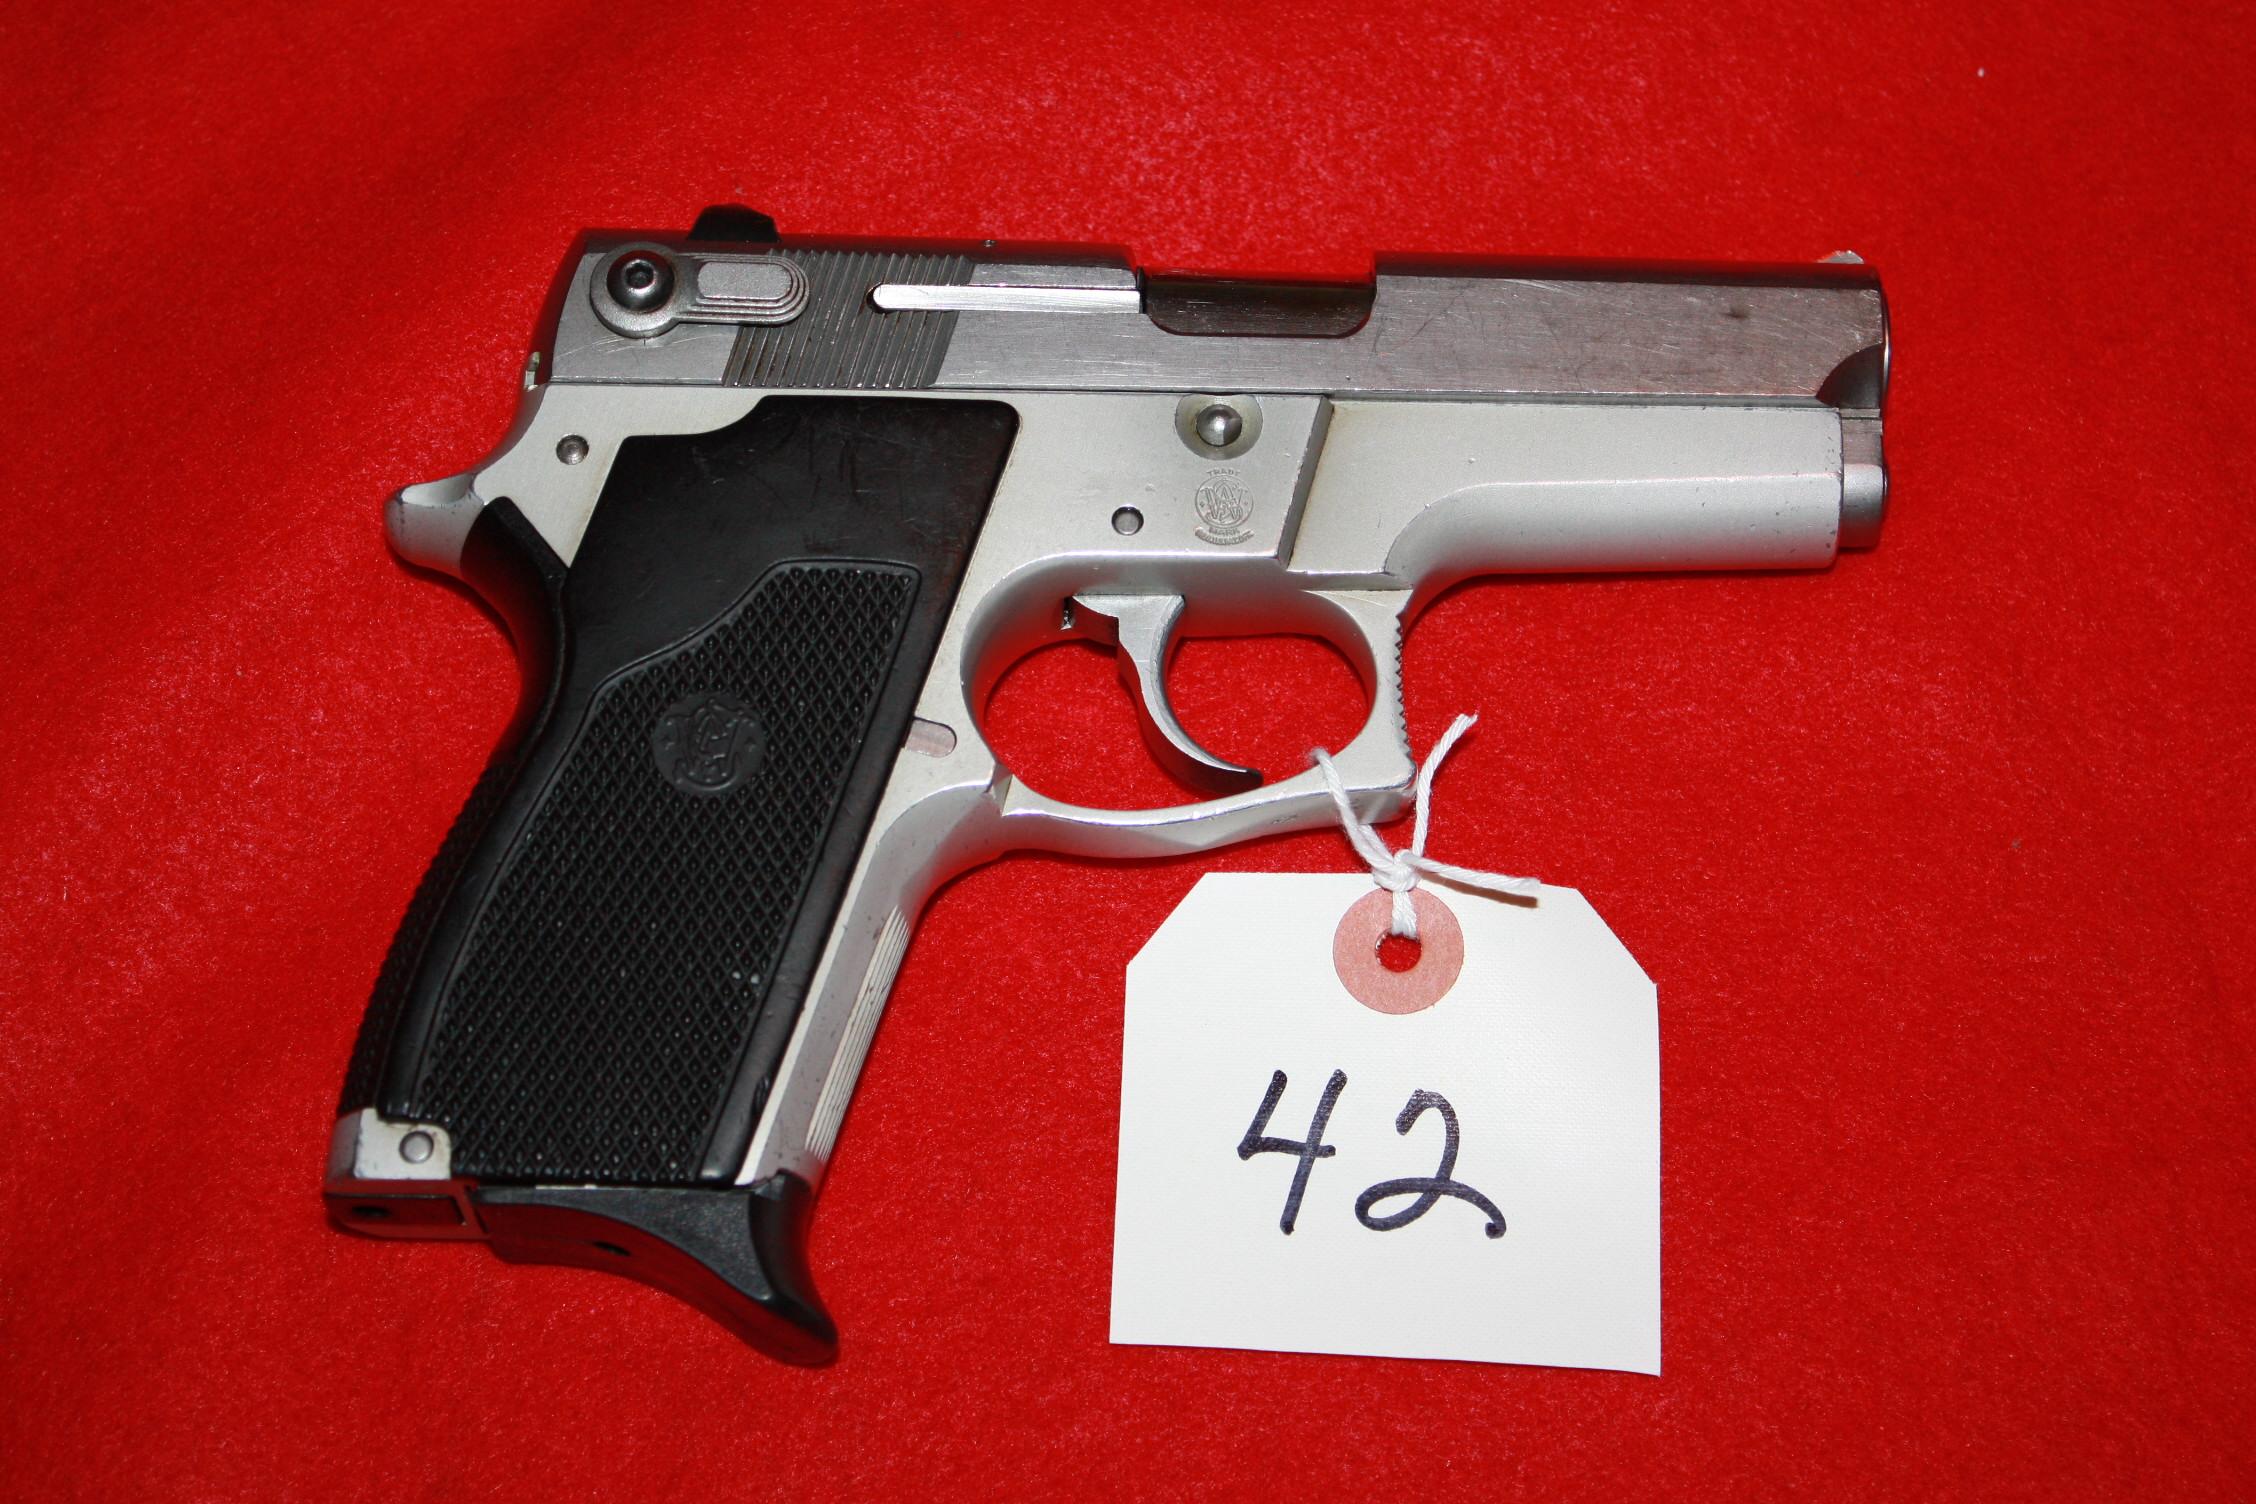 Smith & Wesson 669 9mm Pistol